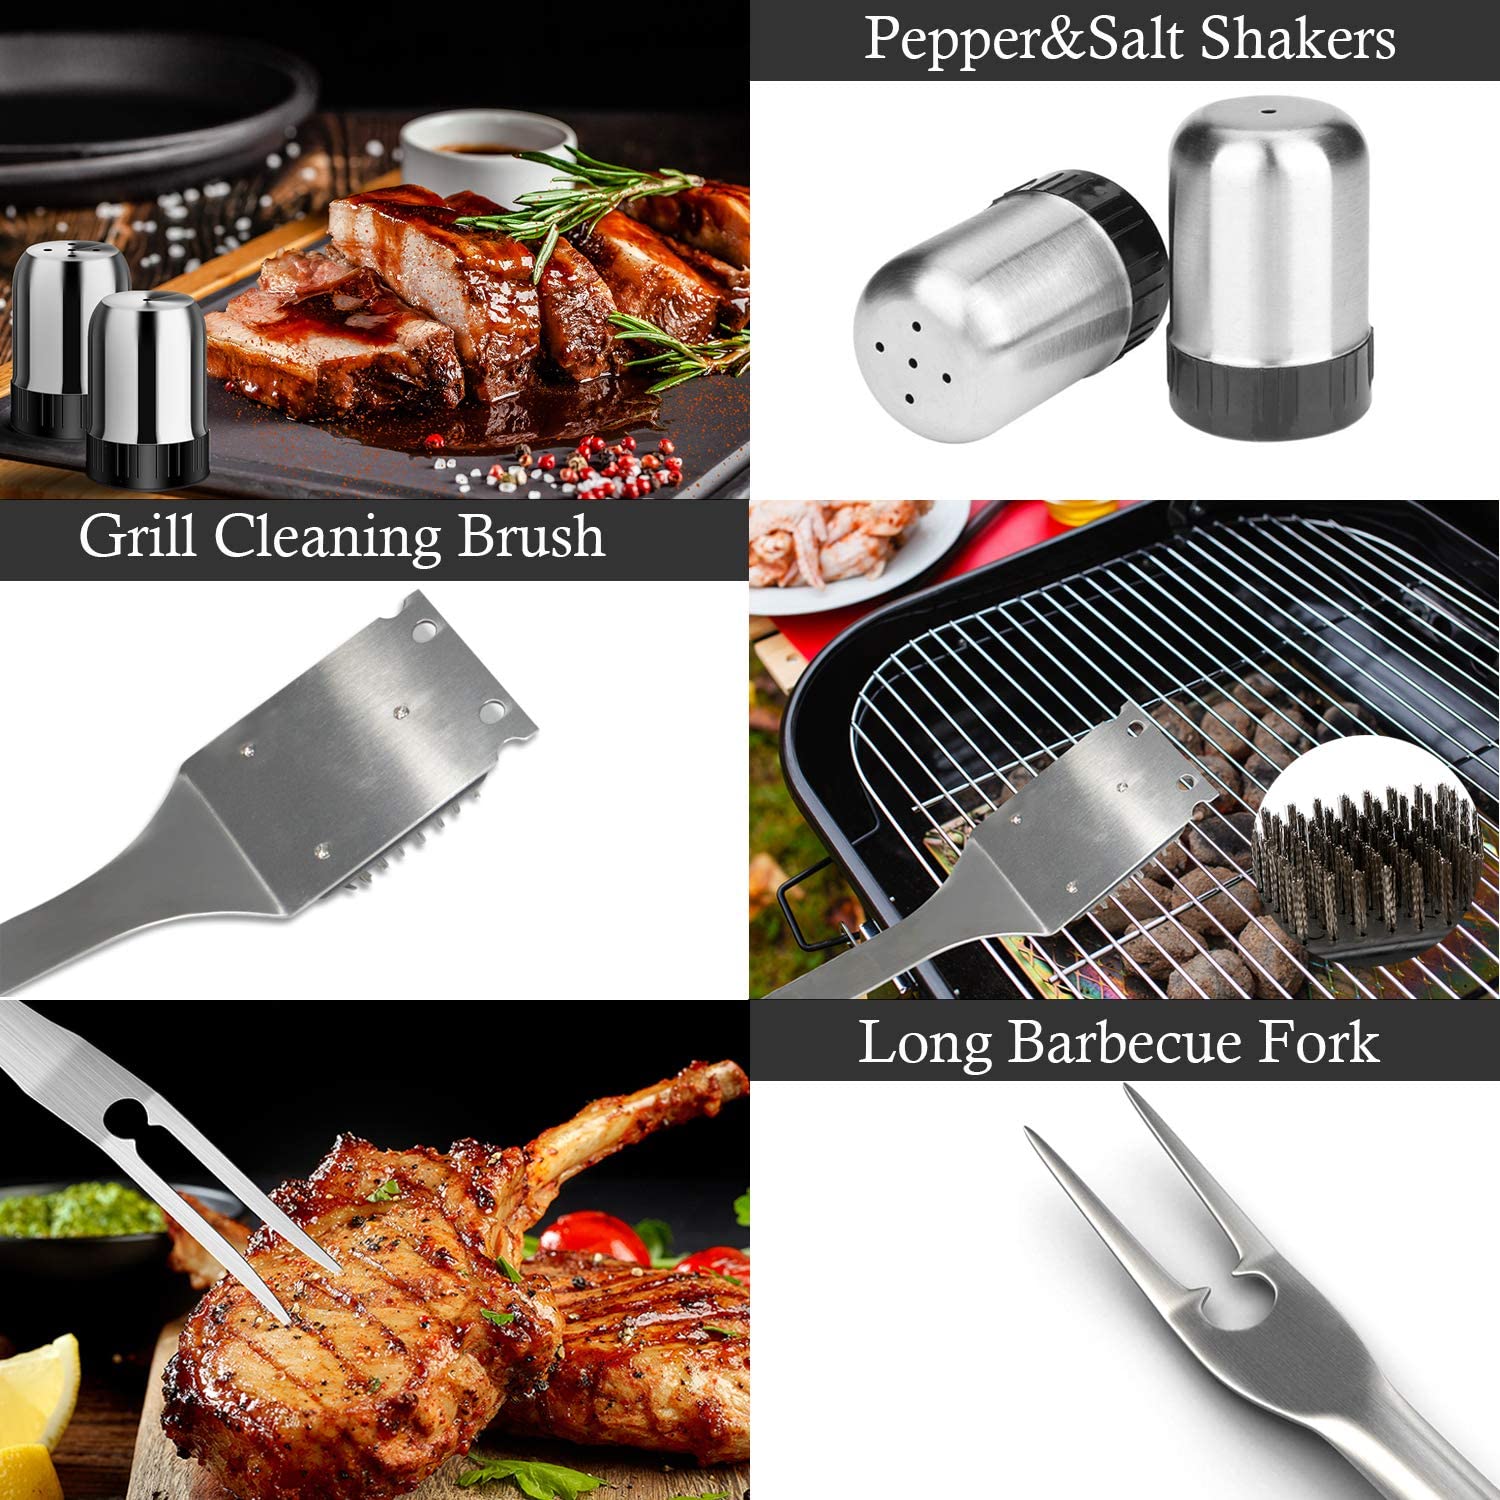 A collage of 6 images showing various bbq tools and the tools being used on a grill.